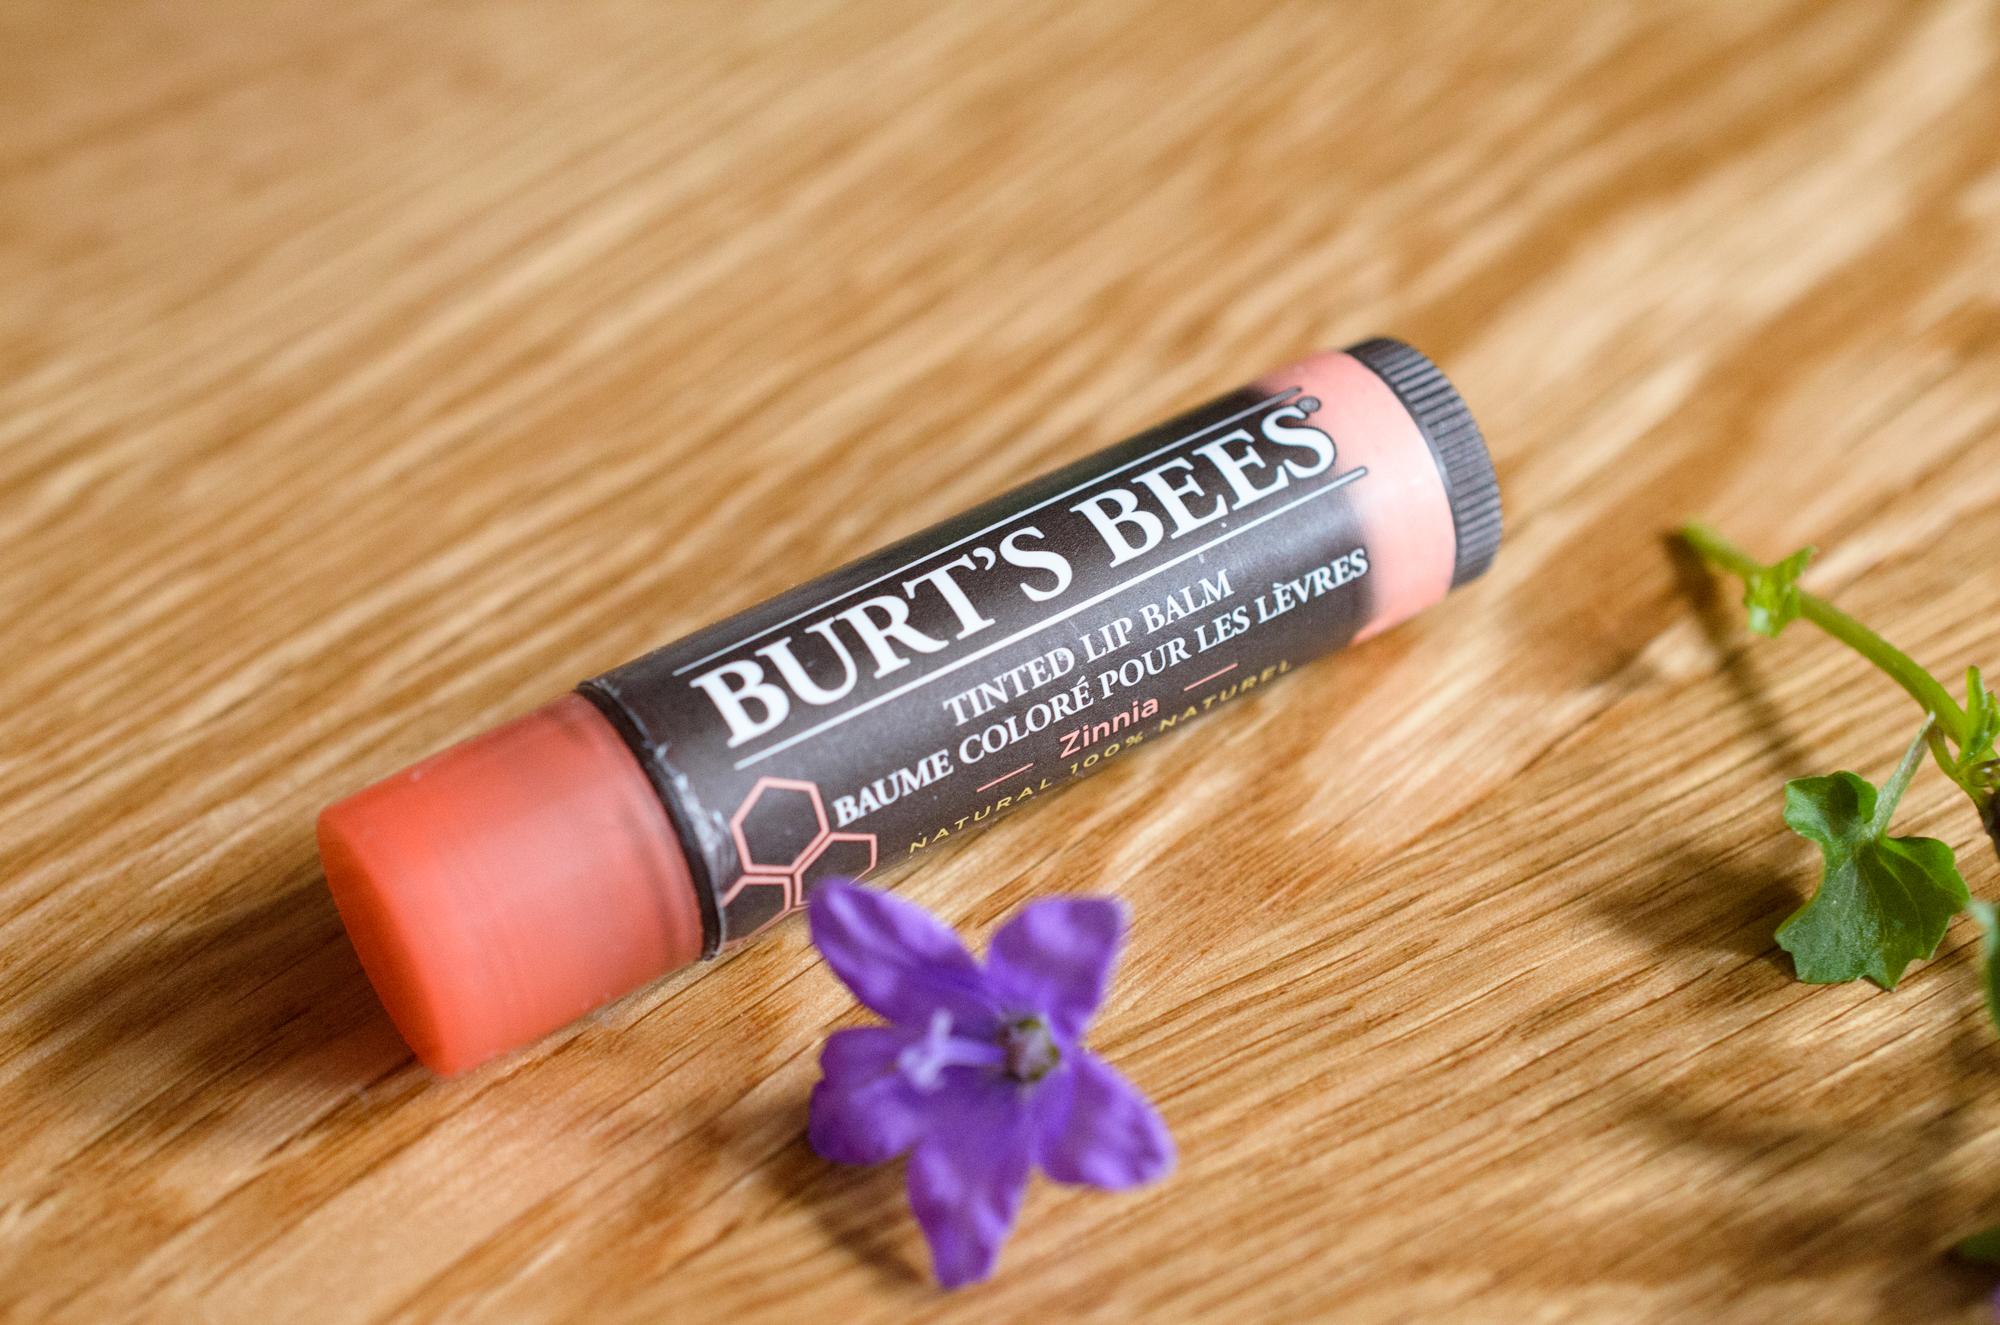 Why Burts Bees Lip Balm Is The Best for Your Lips